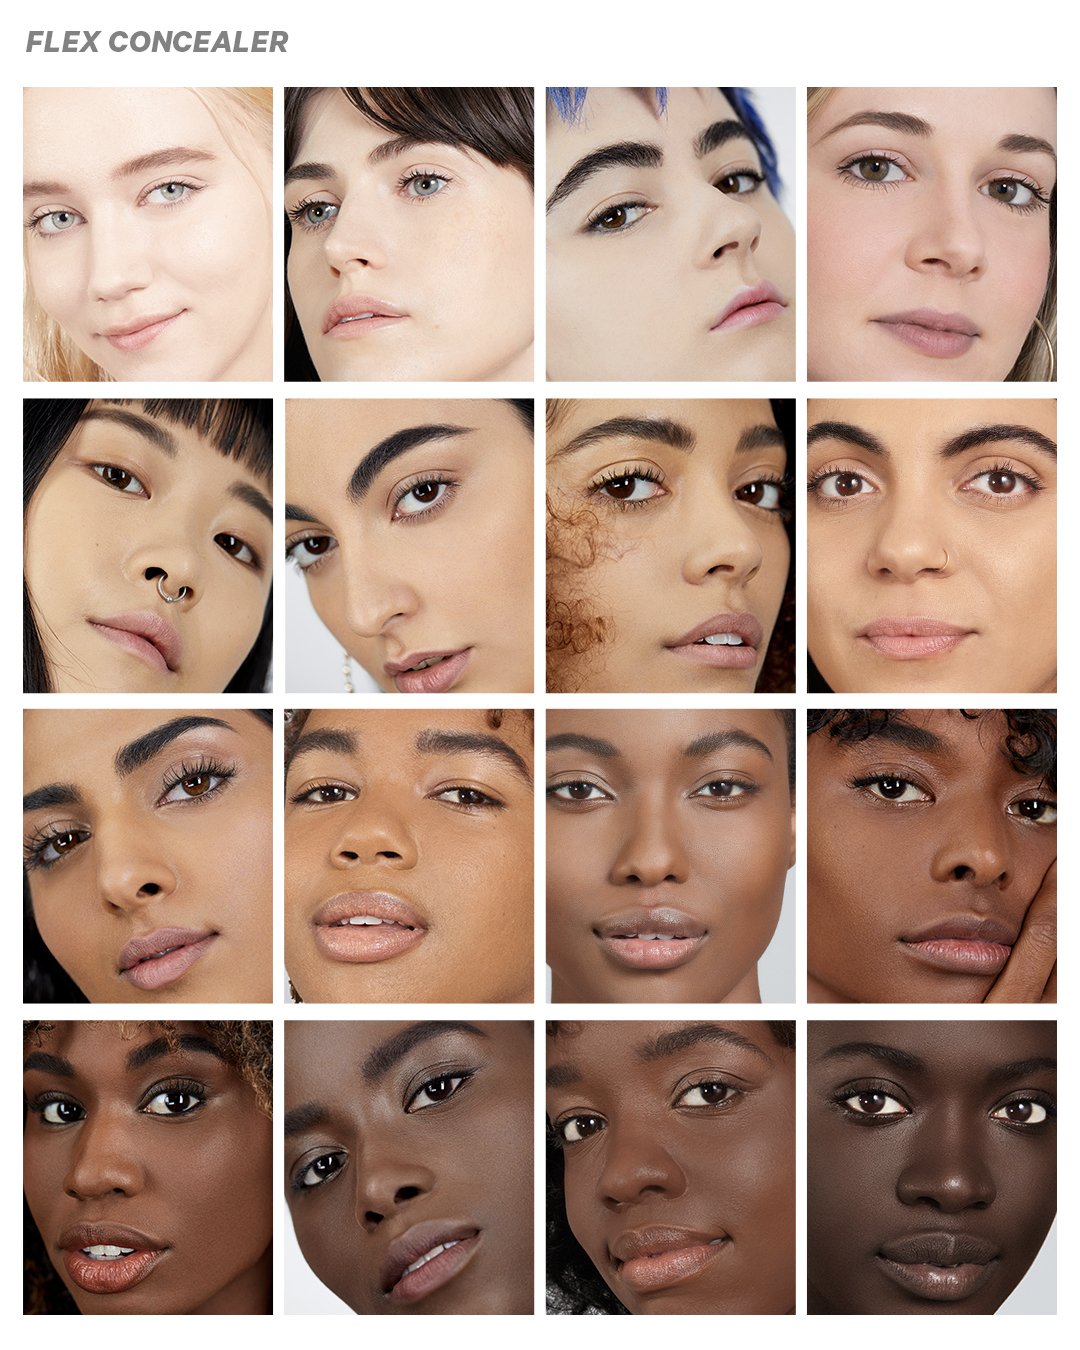 Gastheer van Trouwens landheer Milk Makeup on Twitter: "GET READY TO MEET YOUR MATCH. 🙌🏽 Introducing 8  NEW shades of both Blur Liquid Matte Foundation and Flex Concealer! Live  NOW on https://t.co/TkHC9TIiOk and https://t.co/Ea4qrYEs0T. 🖤  https://t.co/NHa7m66XHz" /